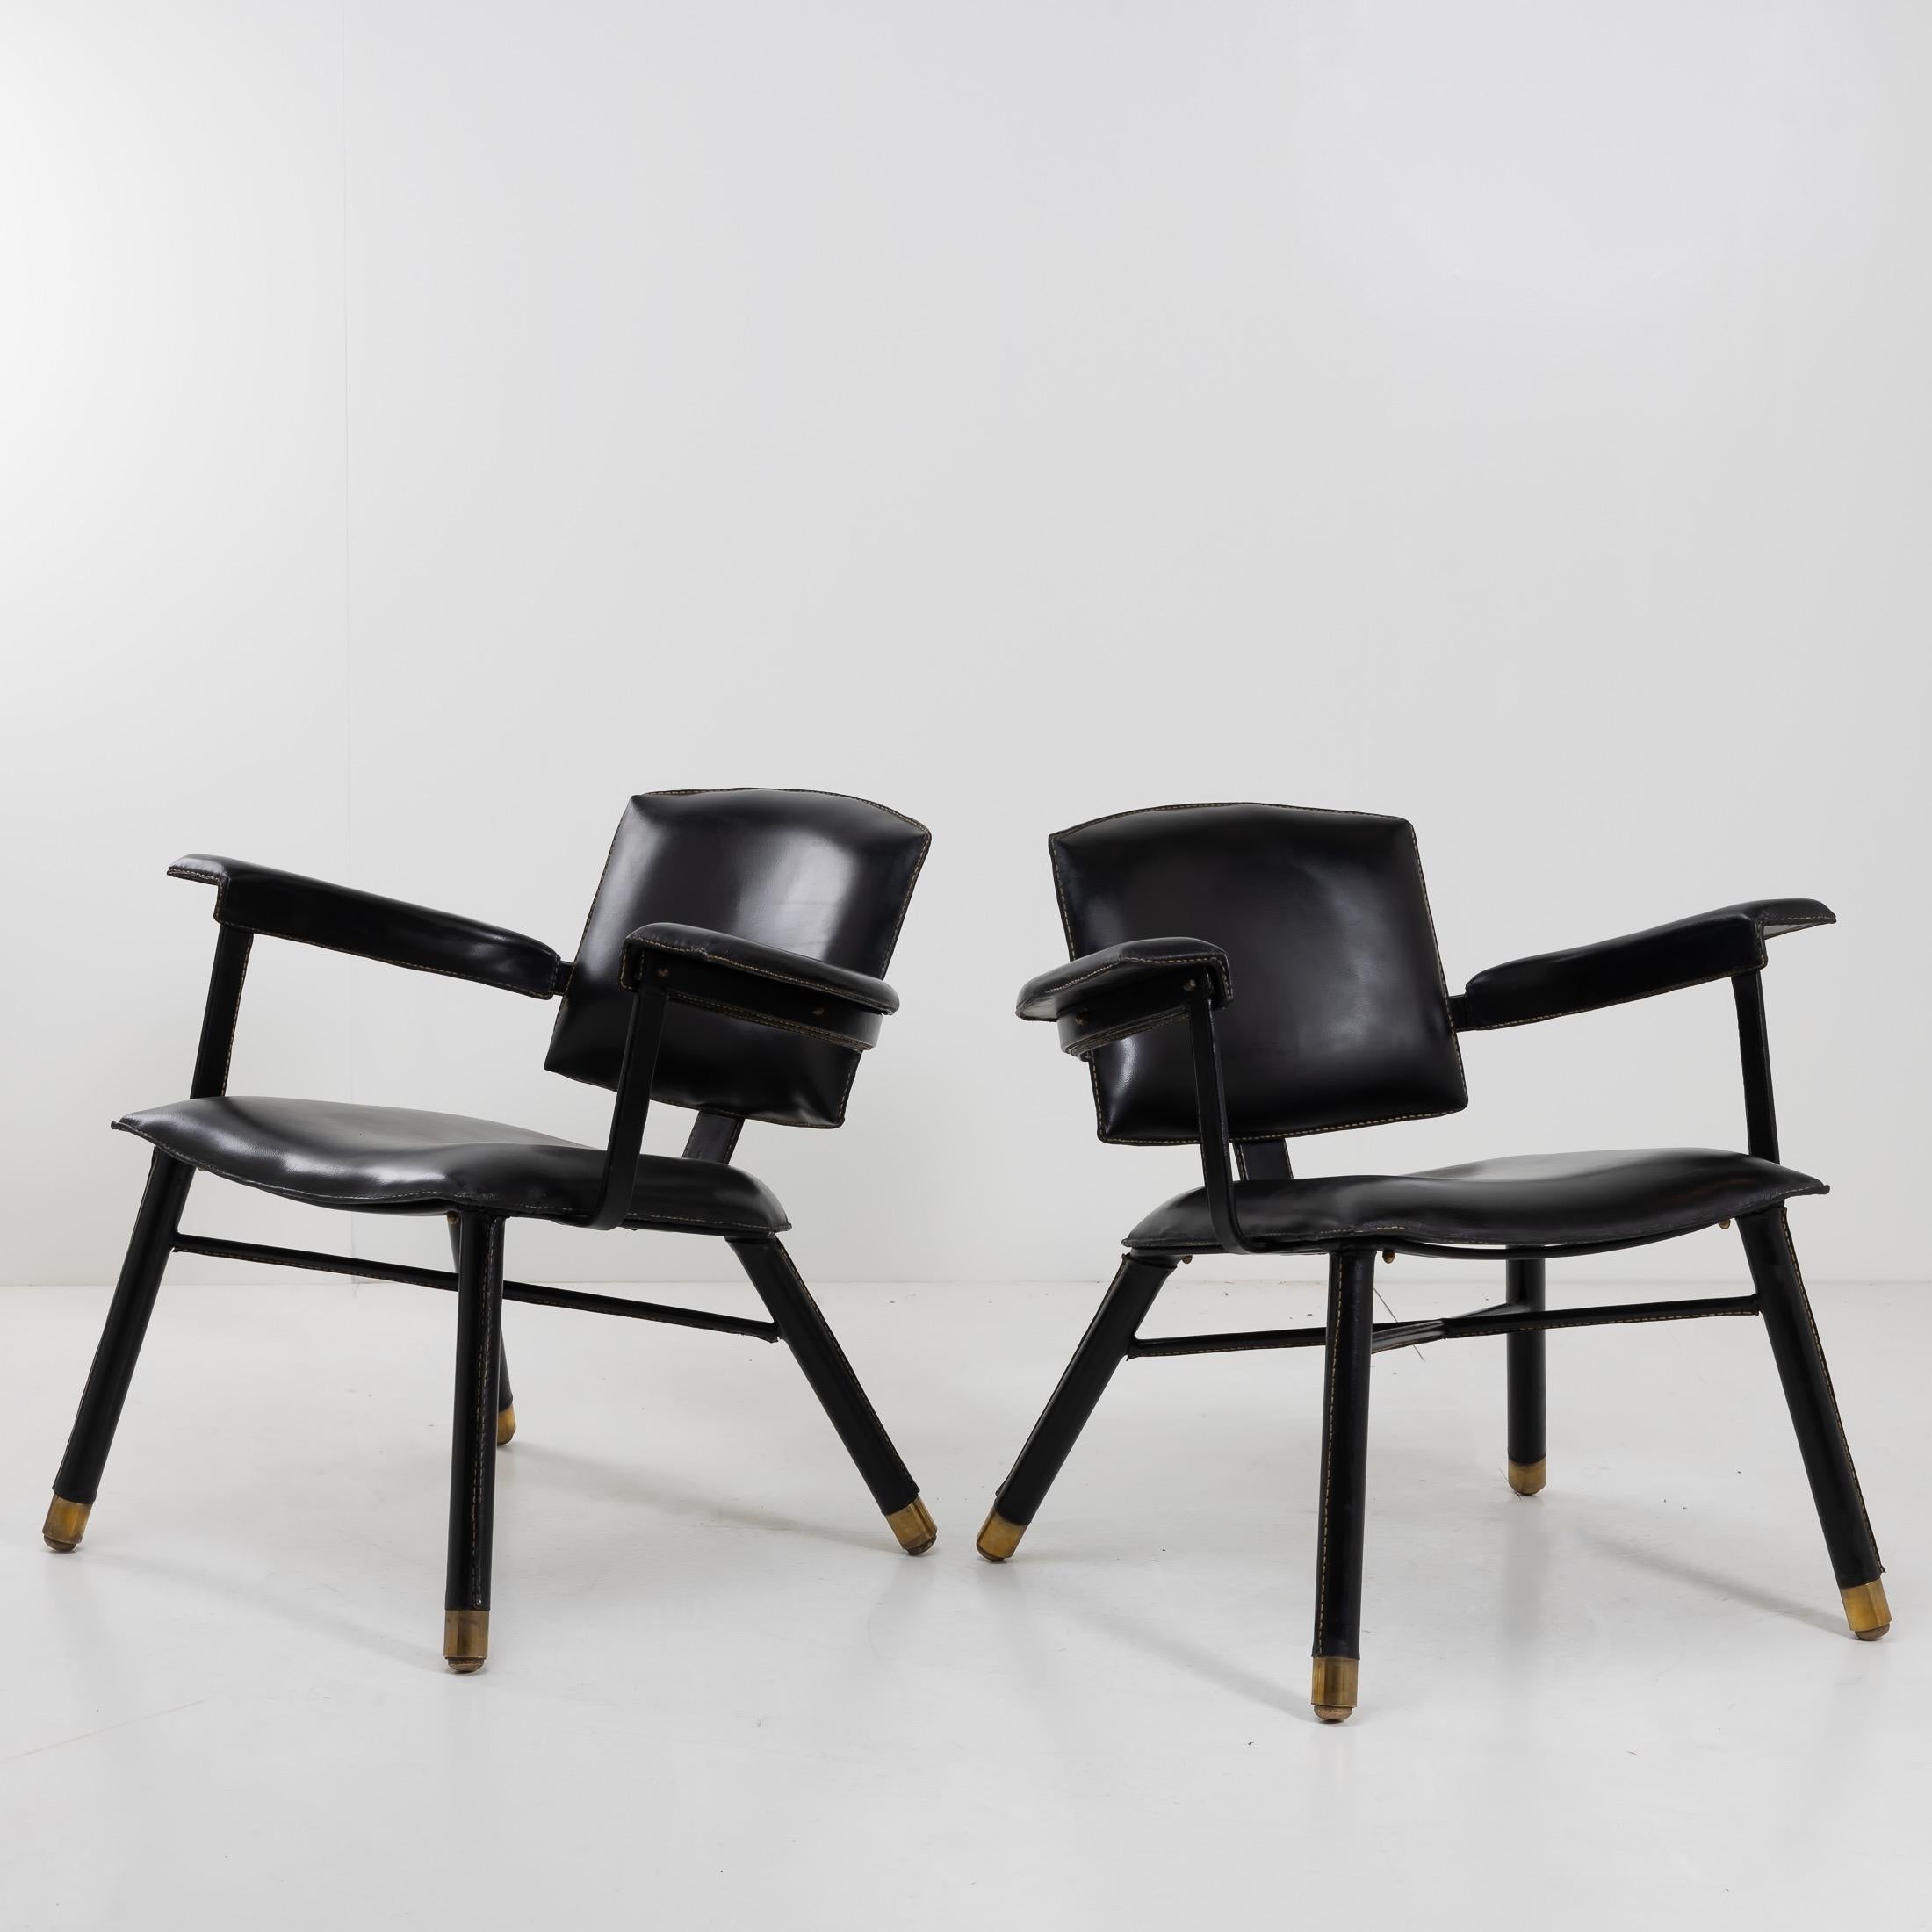 About this pair of black leather armchairs by Jacques Adnet
Pair of 